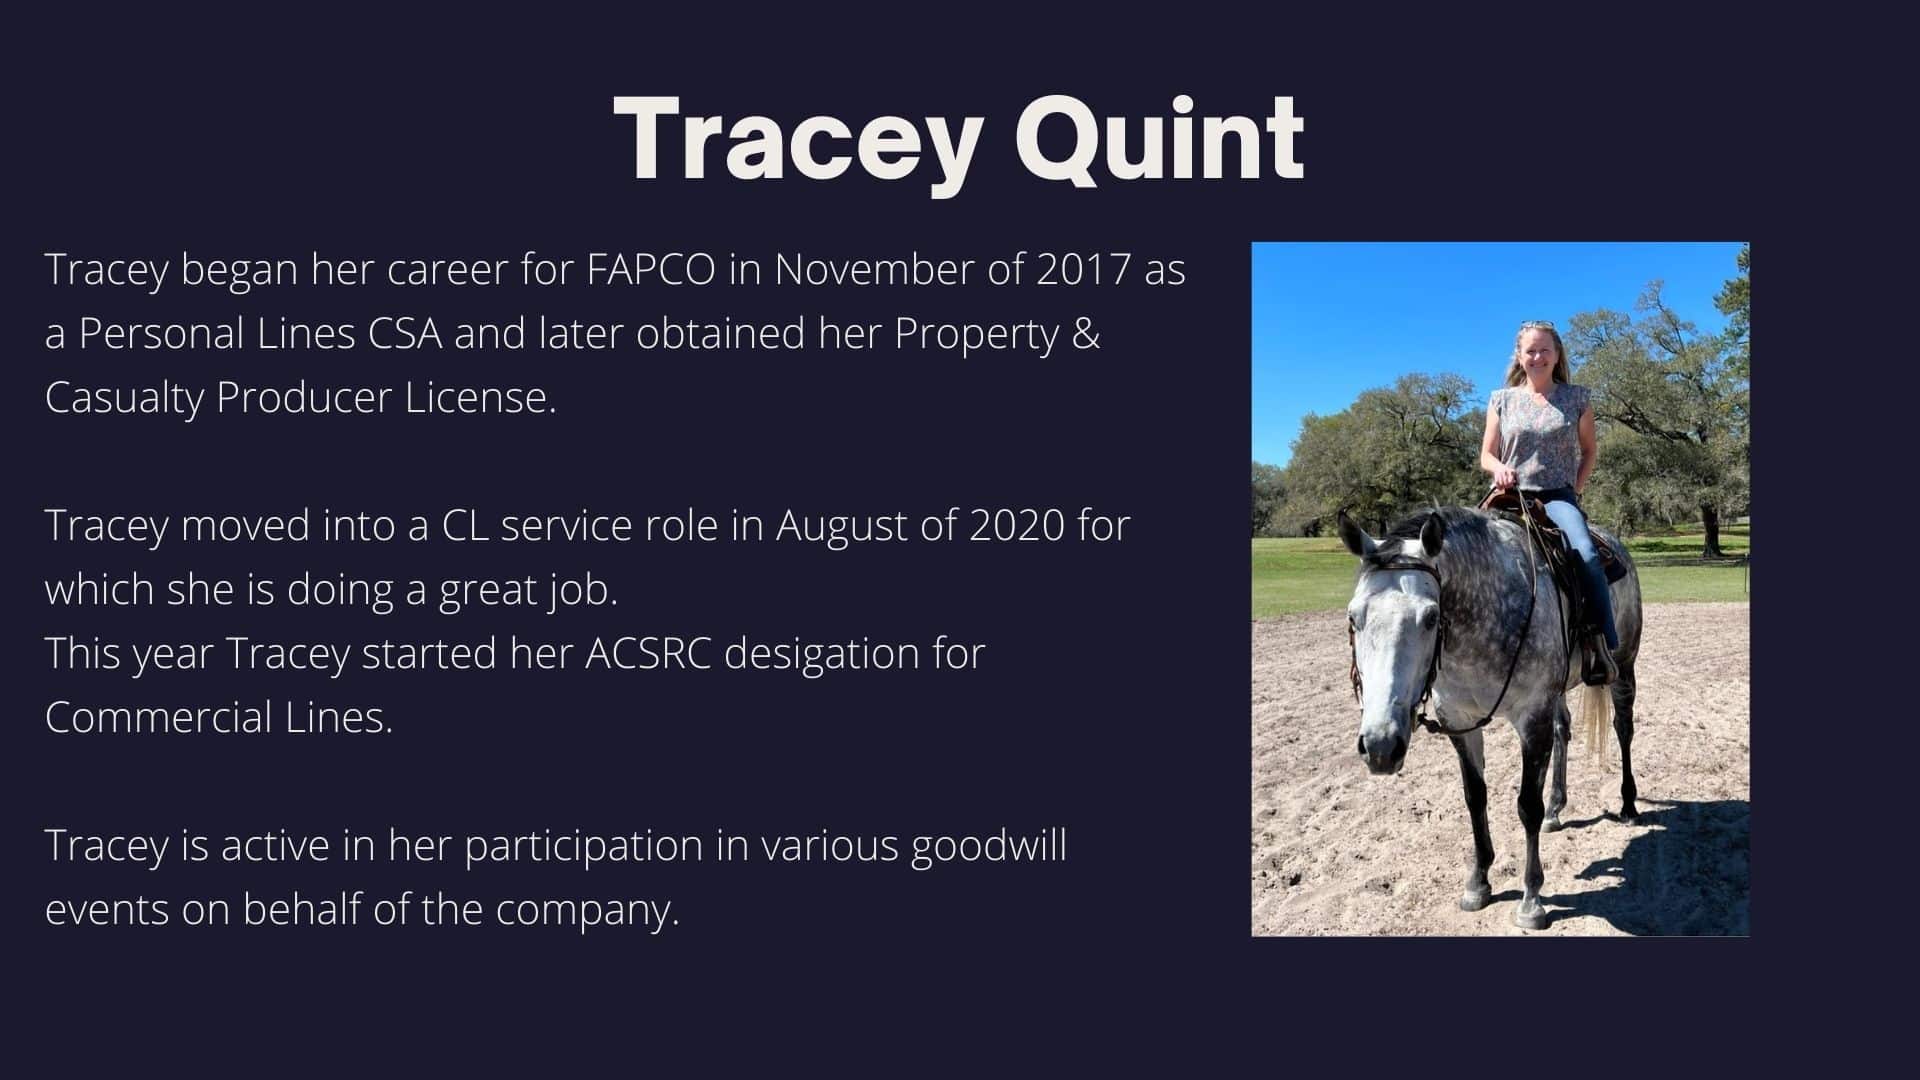 Tracey Quint 5 years